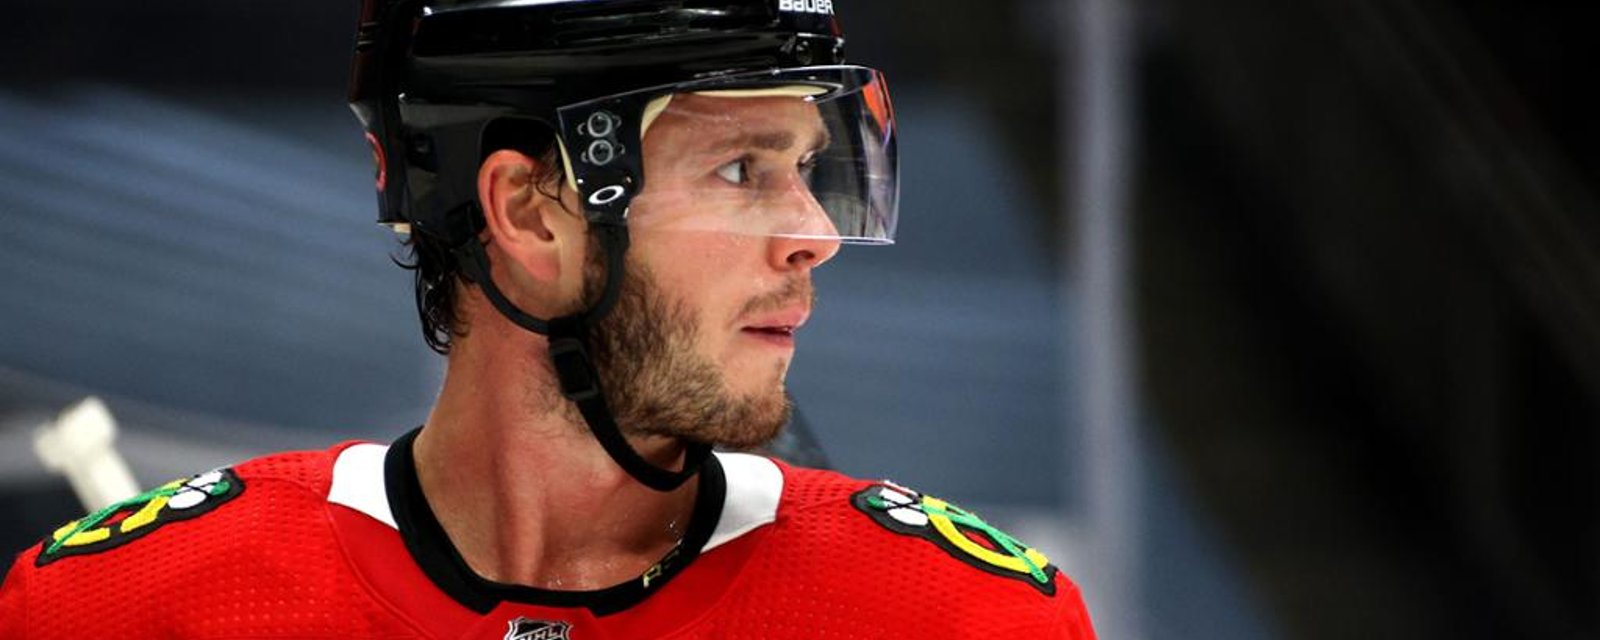 Speculation: Wrong diagnosis for Jonathan Toews? 